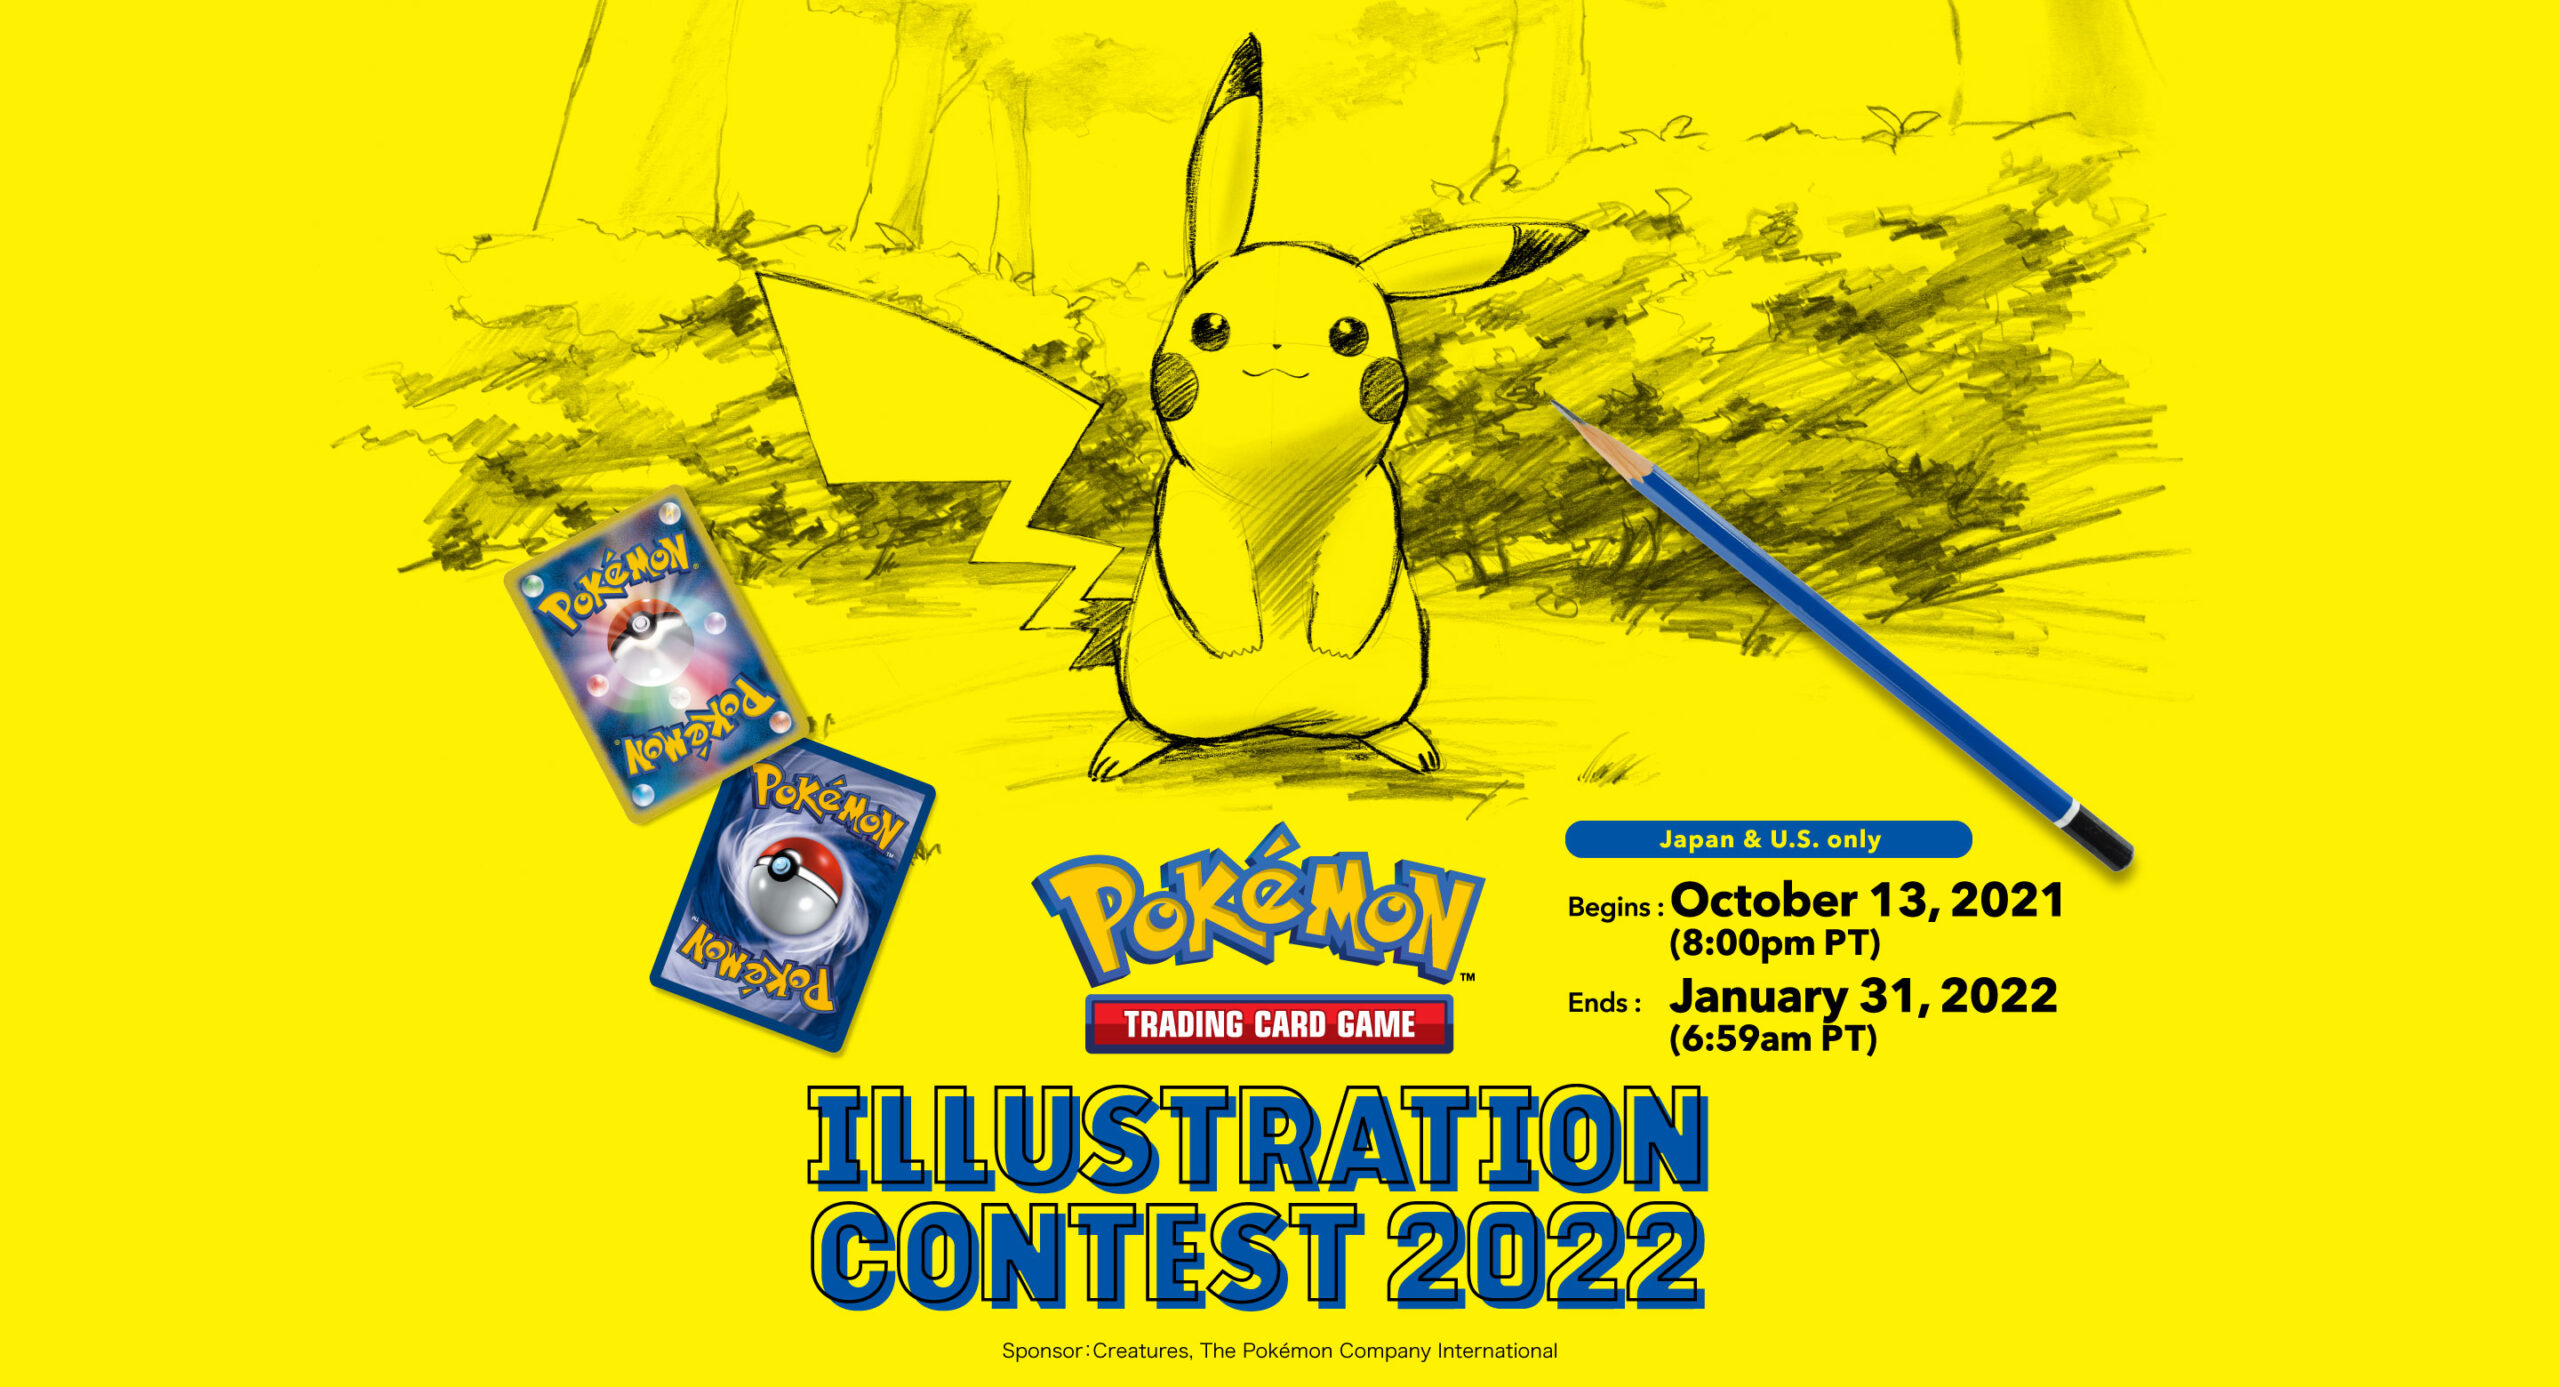 Pokémon Trading Card Game Illustration Contest 2022. – Round One – Top 300